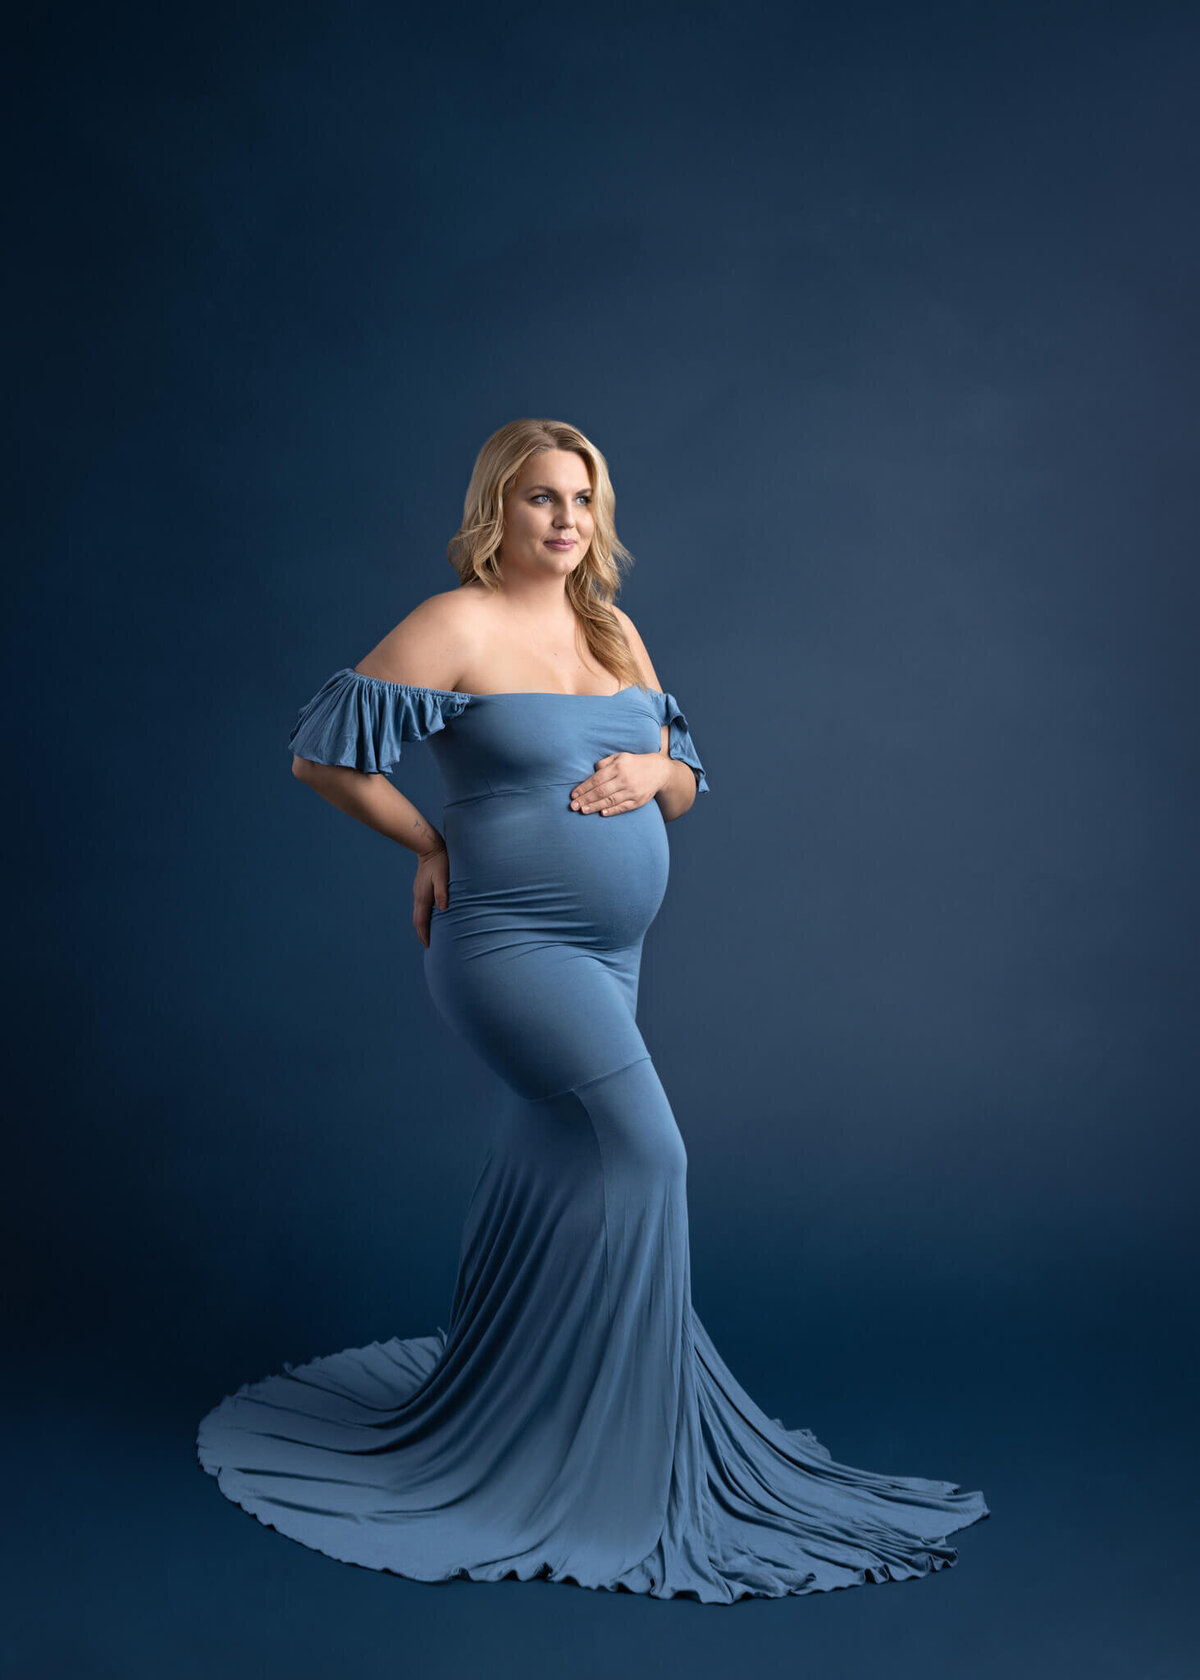 pregnant woman holding her belly wearing a blue dress